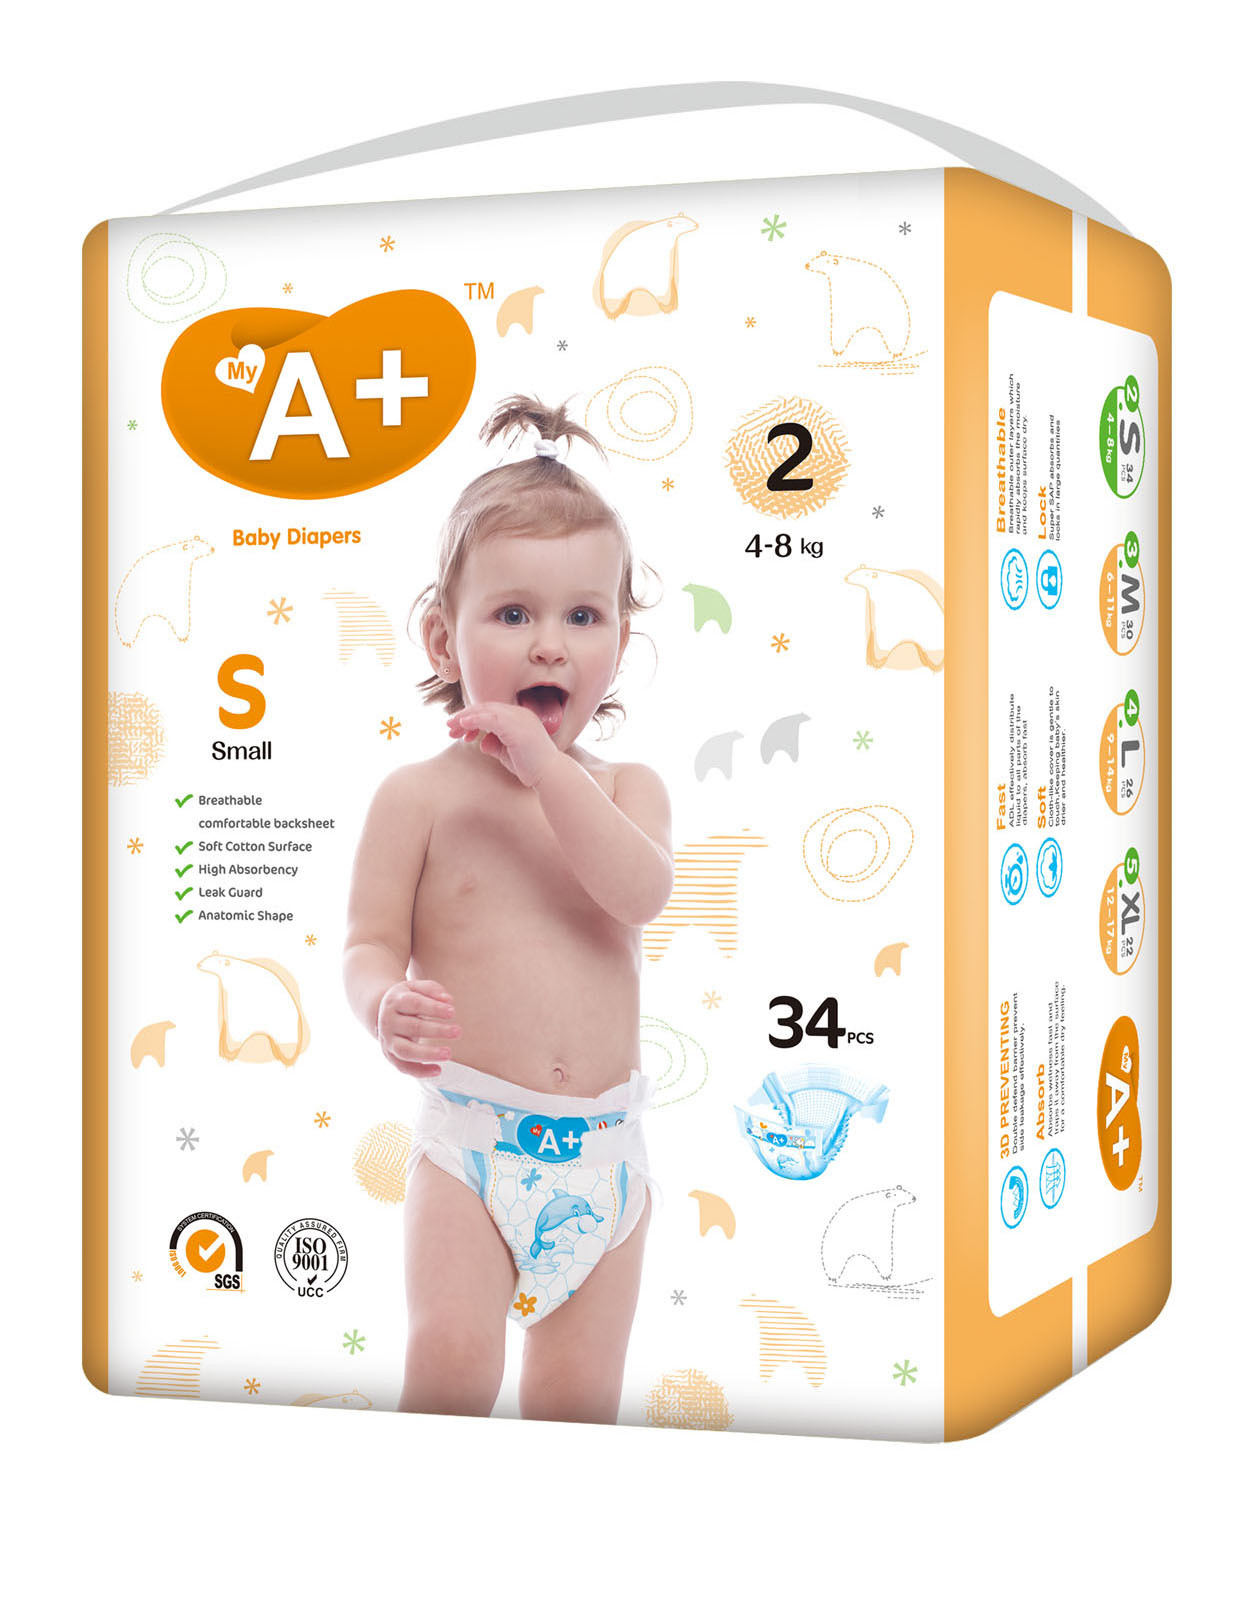 My A+ Brand Baby Diaper